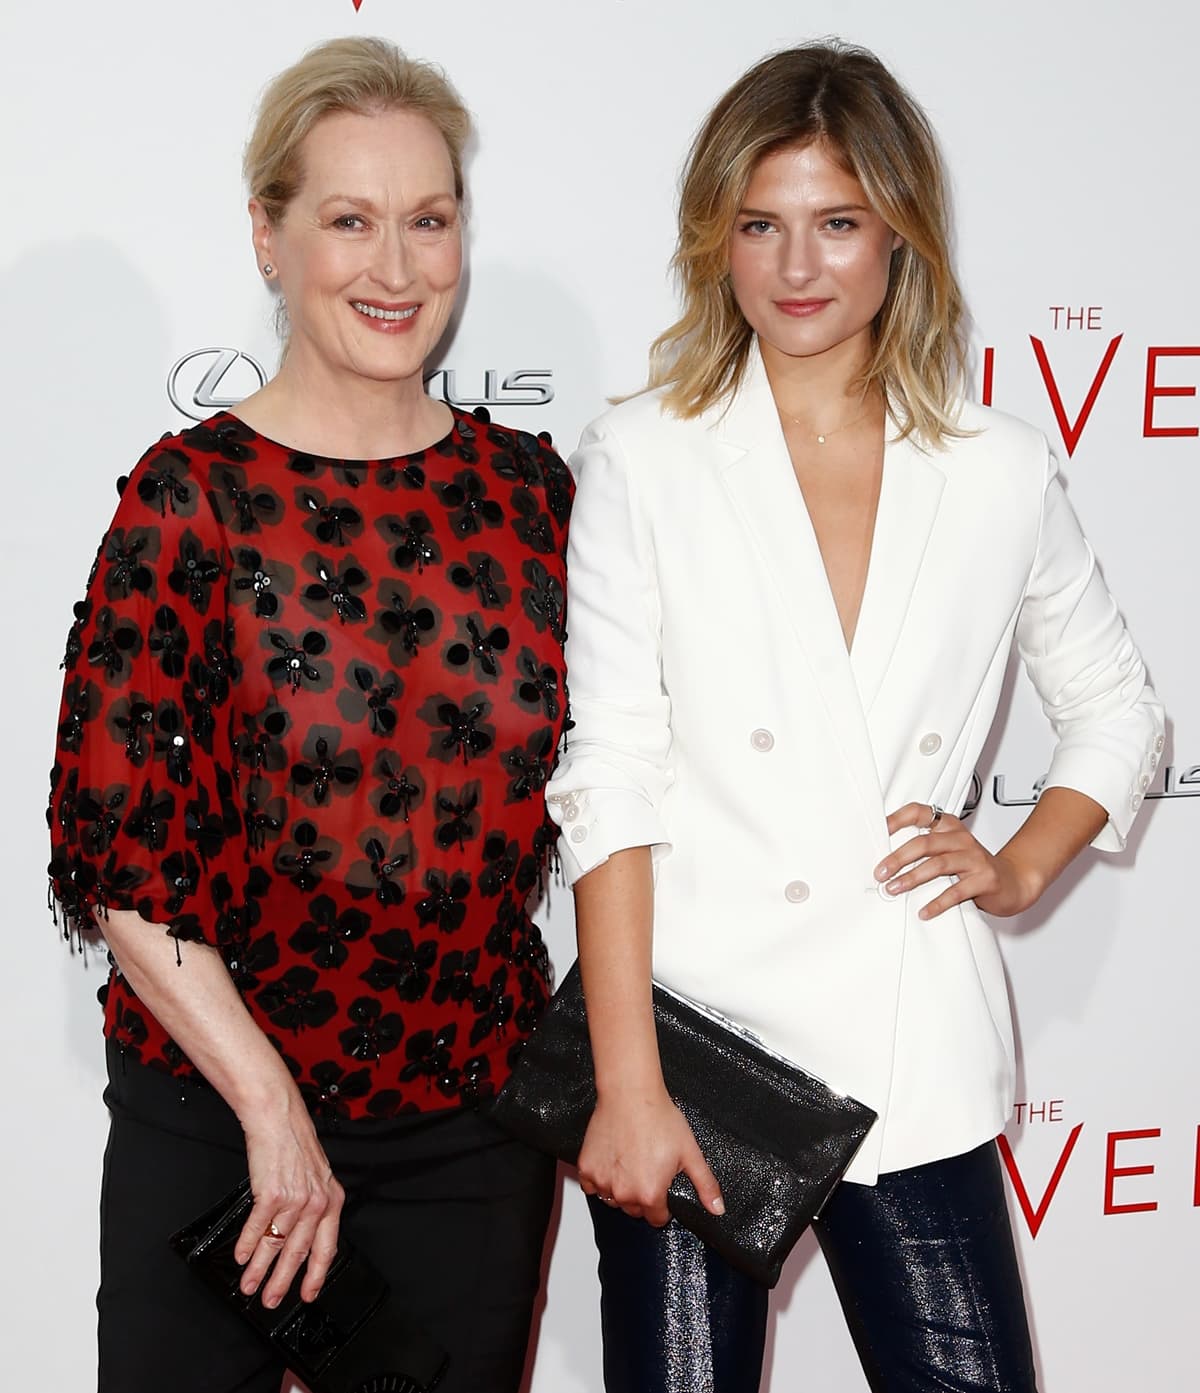 Actress Meryl Streep (L) and Louisa Gummer attend "The Giver" premiere at Ziegfeld Theater on August 11, 2014 in New York City